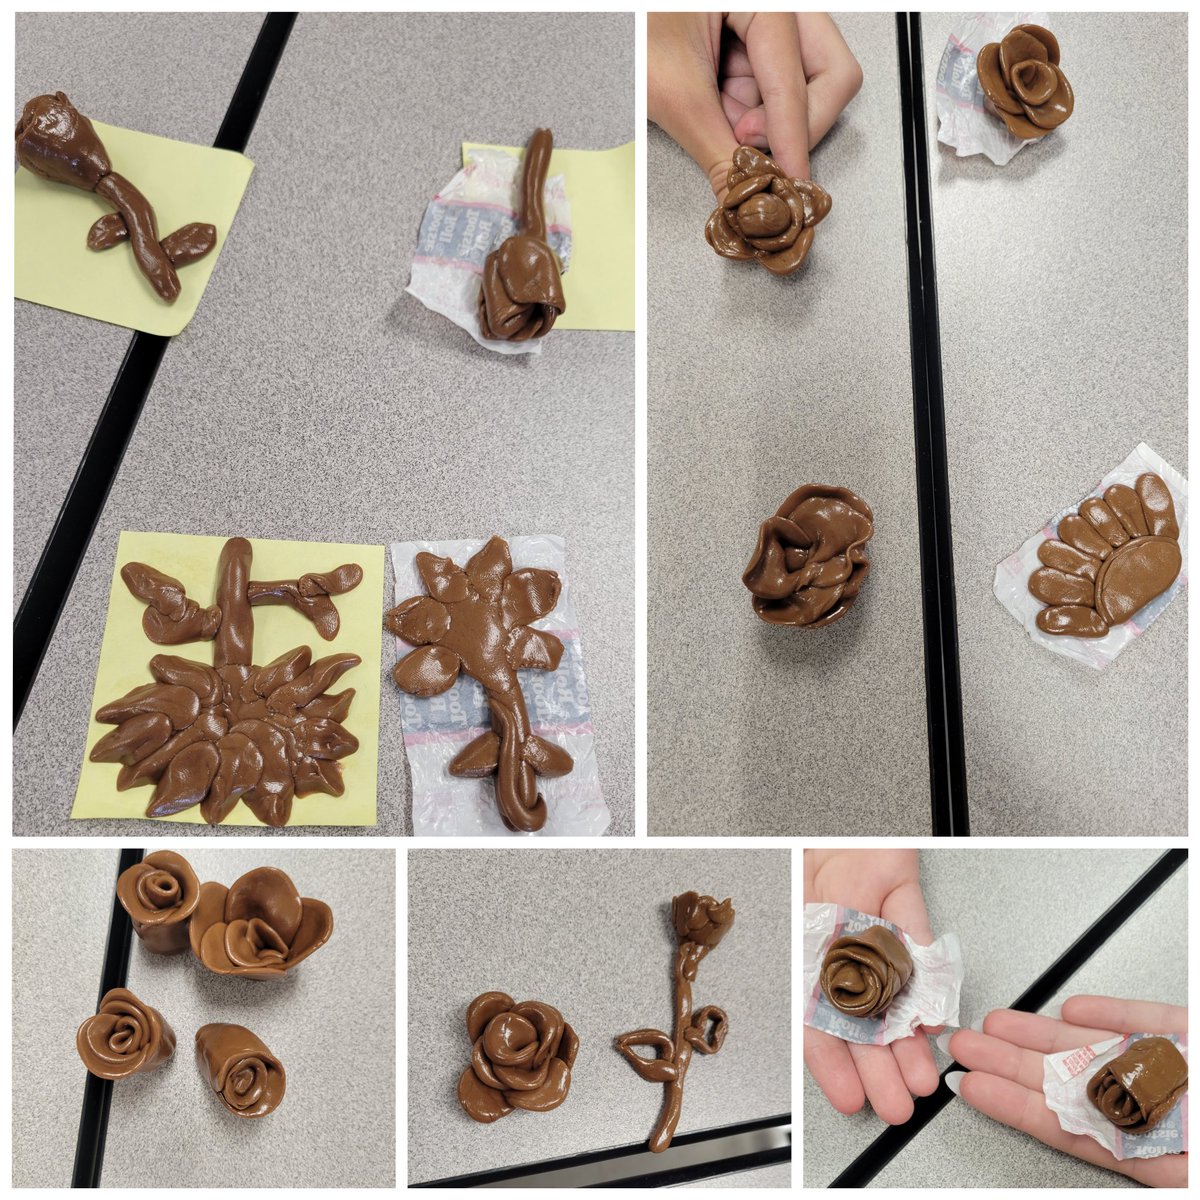 We tapped into the creative side of our brain today by creating tootsie roll roses 🌹 #handsonlearning #AHSisFamily #edibleart